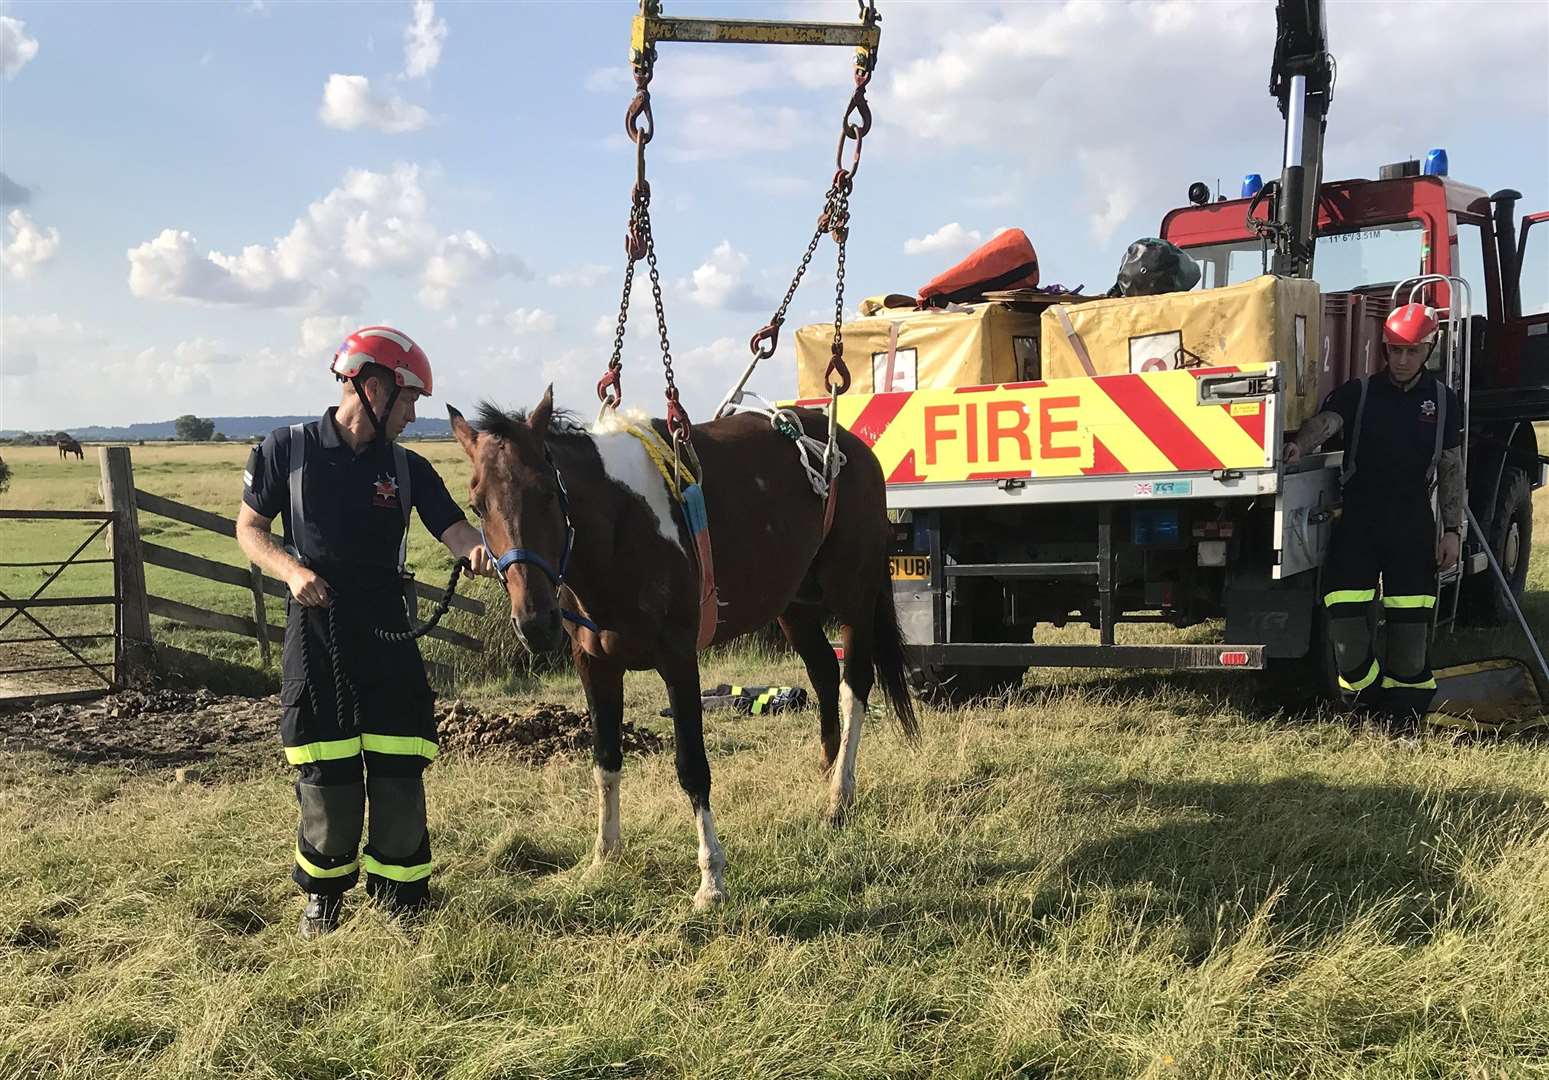 The horse is winched to safety. Image from the RSPCA